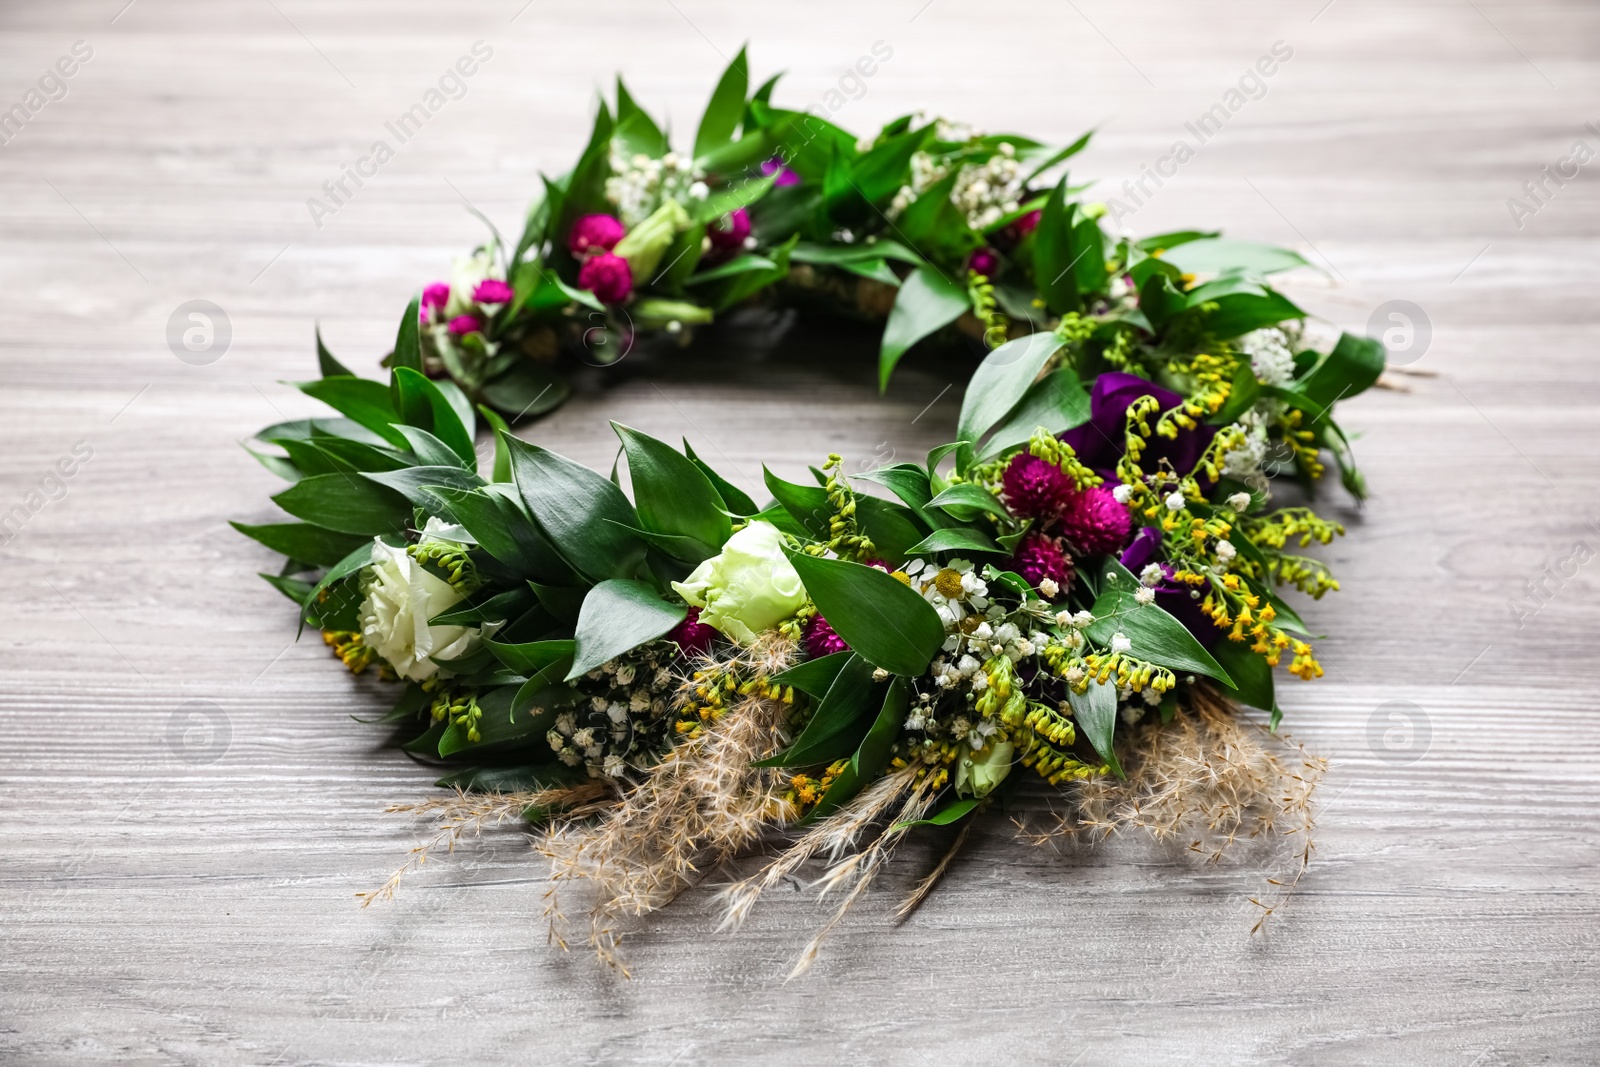 Photo of Beautiful wreath made of flowers and leaves on wooden table